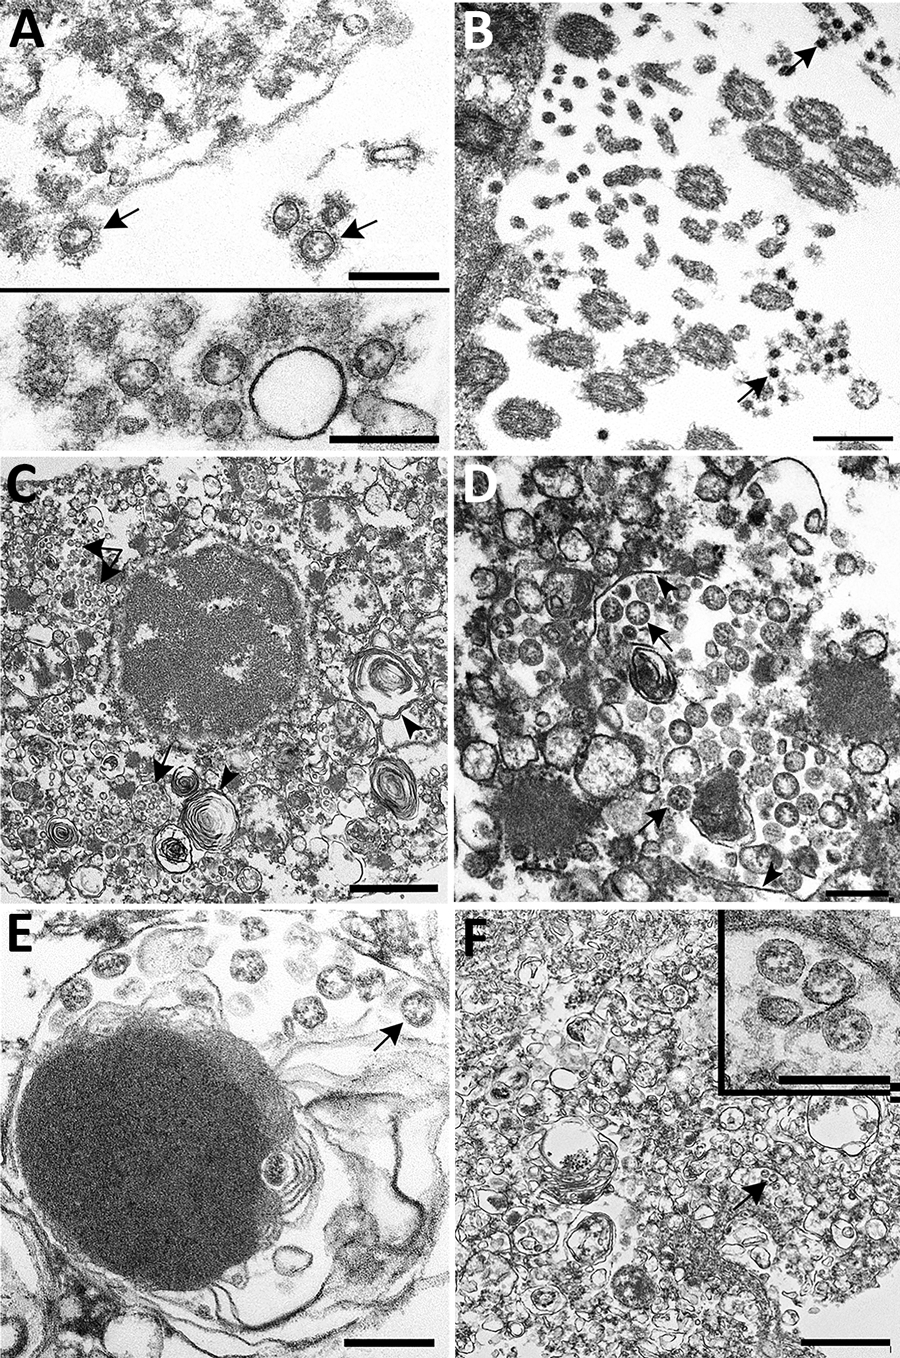 Ultrastructural features of severe acute respiratory syndrome coronavirus 2 lung infection in fatal coronavirus disease. A) Top: alveolar space containing extracellular virions (arrows) with prominent surface projections. Bottom: cluster of virions in the alveolar space. Scale bars indicate 200 nm. B) Extracellular virions (arrow) associated with ciliated cells of the upper airway. Scale bar indicates 200 nm. C) Membrane-bound vacuoles (arrows) containing viral particles within the cytoplasm of 